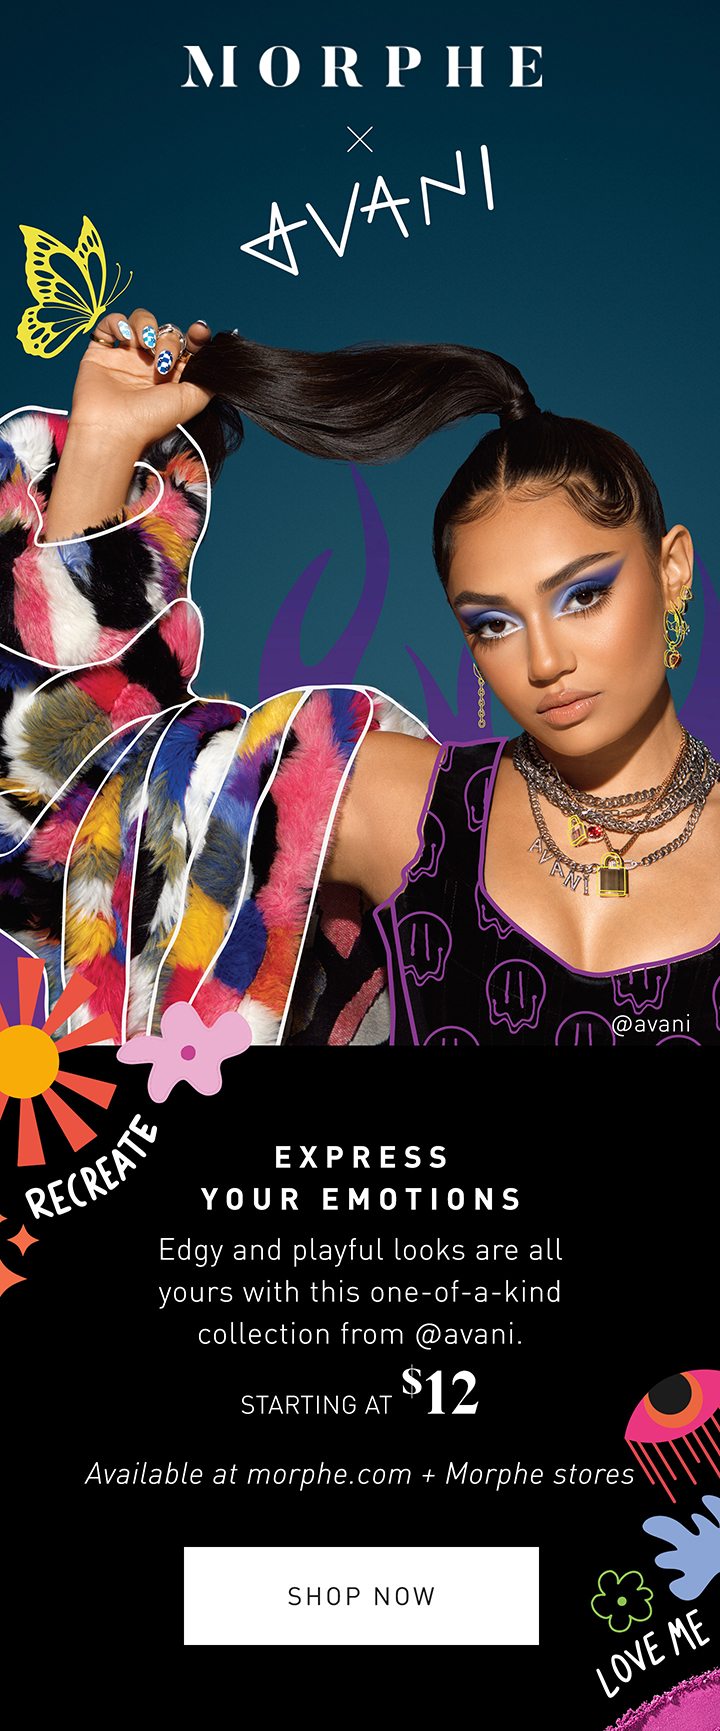 MORPHE MORPHE X AVANI EXPRESS YOUR EMOTIONS Edgy and playful looks are all yours with this one-of-a-kind collection from @avani. STARTING AT $12 Available at morphe.com + Morphe stores SHOP NOW